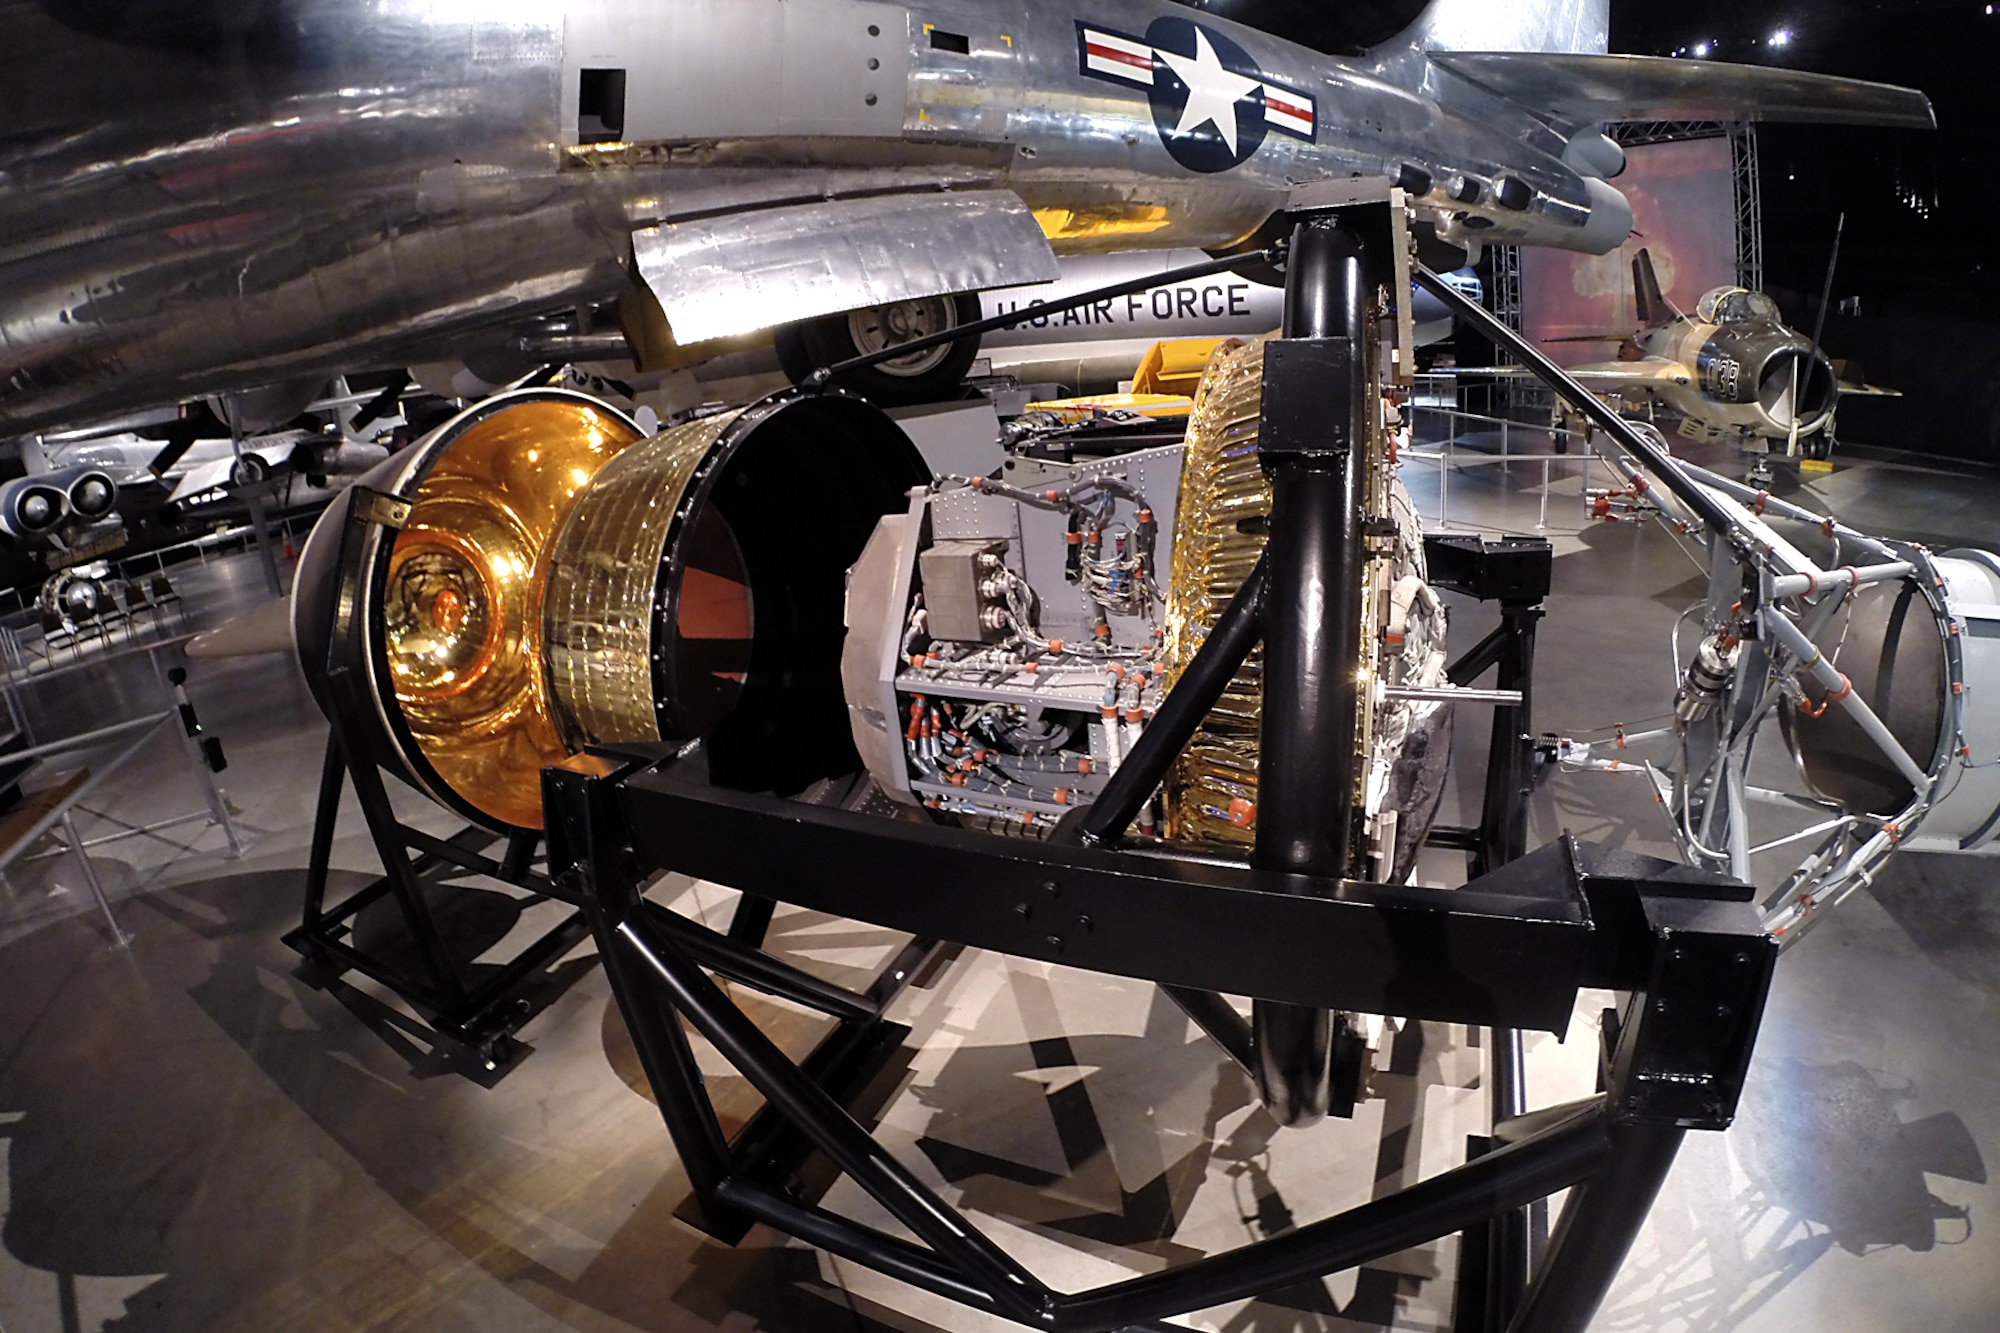 HEXAGON KH-9 reconnaissance satellite in the Cold War Gallery at the National Museum of the U.S. Air Force. (U.S. Air Force Photo)
